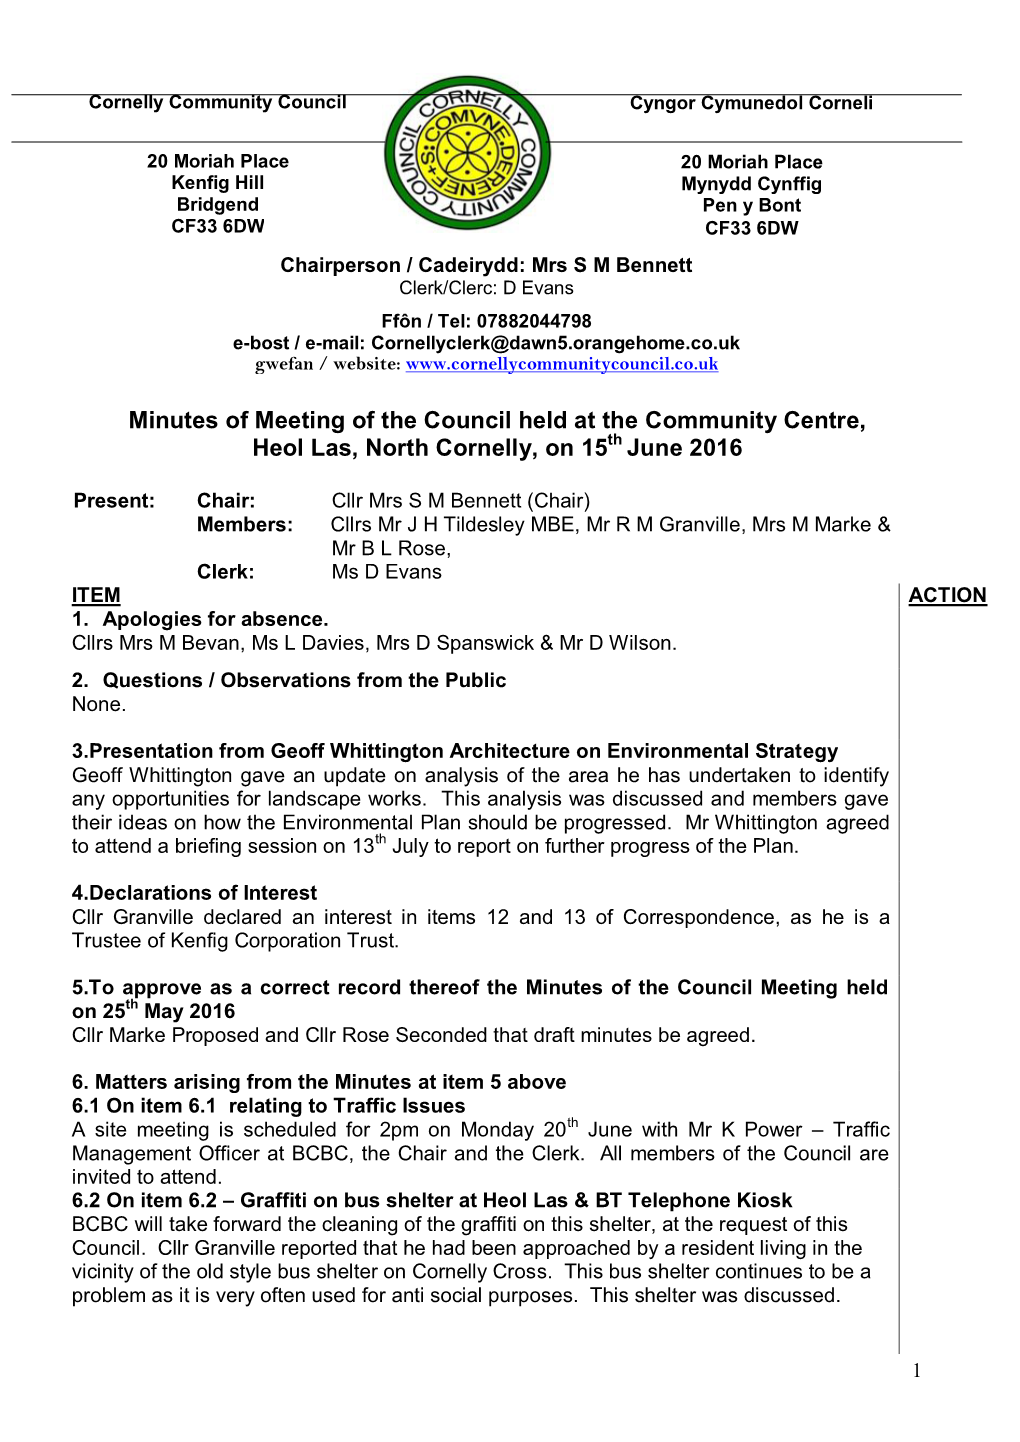 Minutes of Meeting of the Council Held at the Community Centre, Heol Las, North Cornelly, on 15Th June 2016